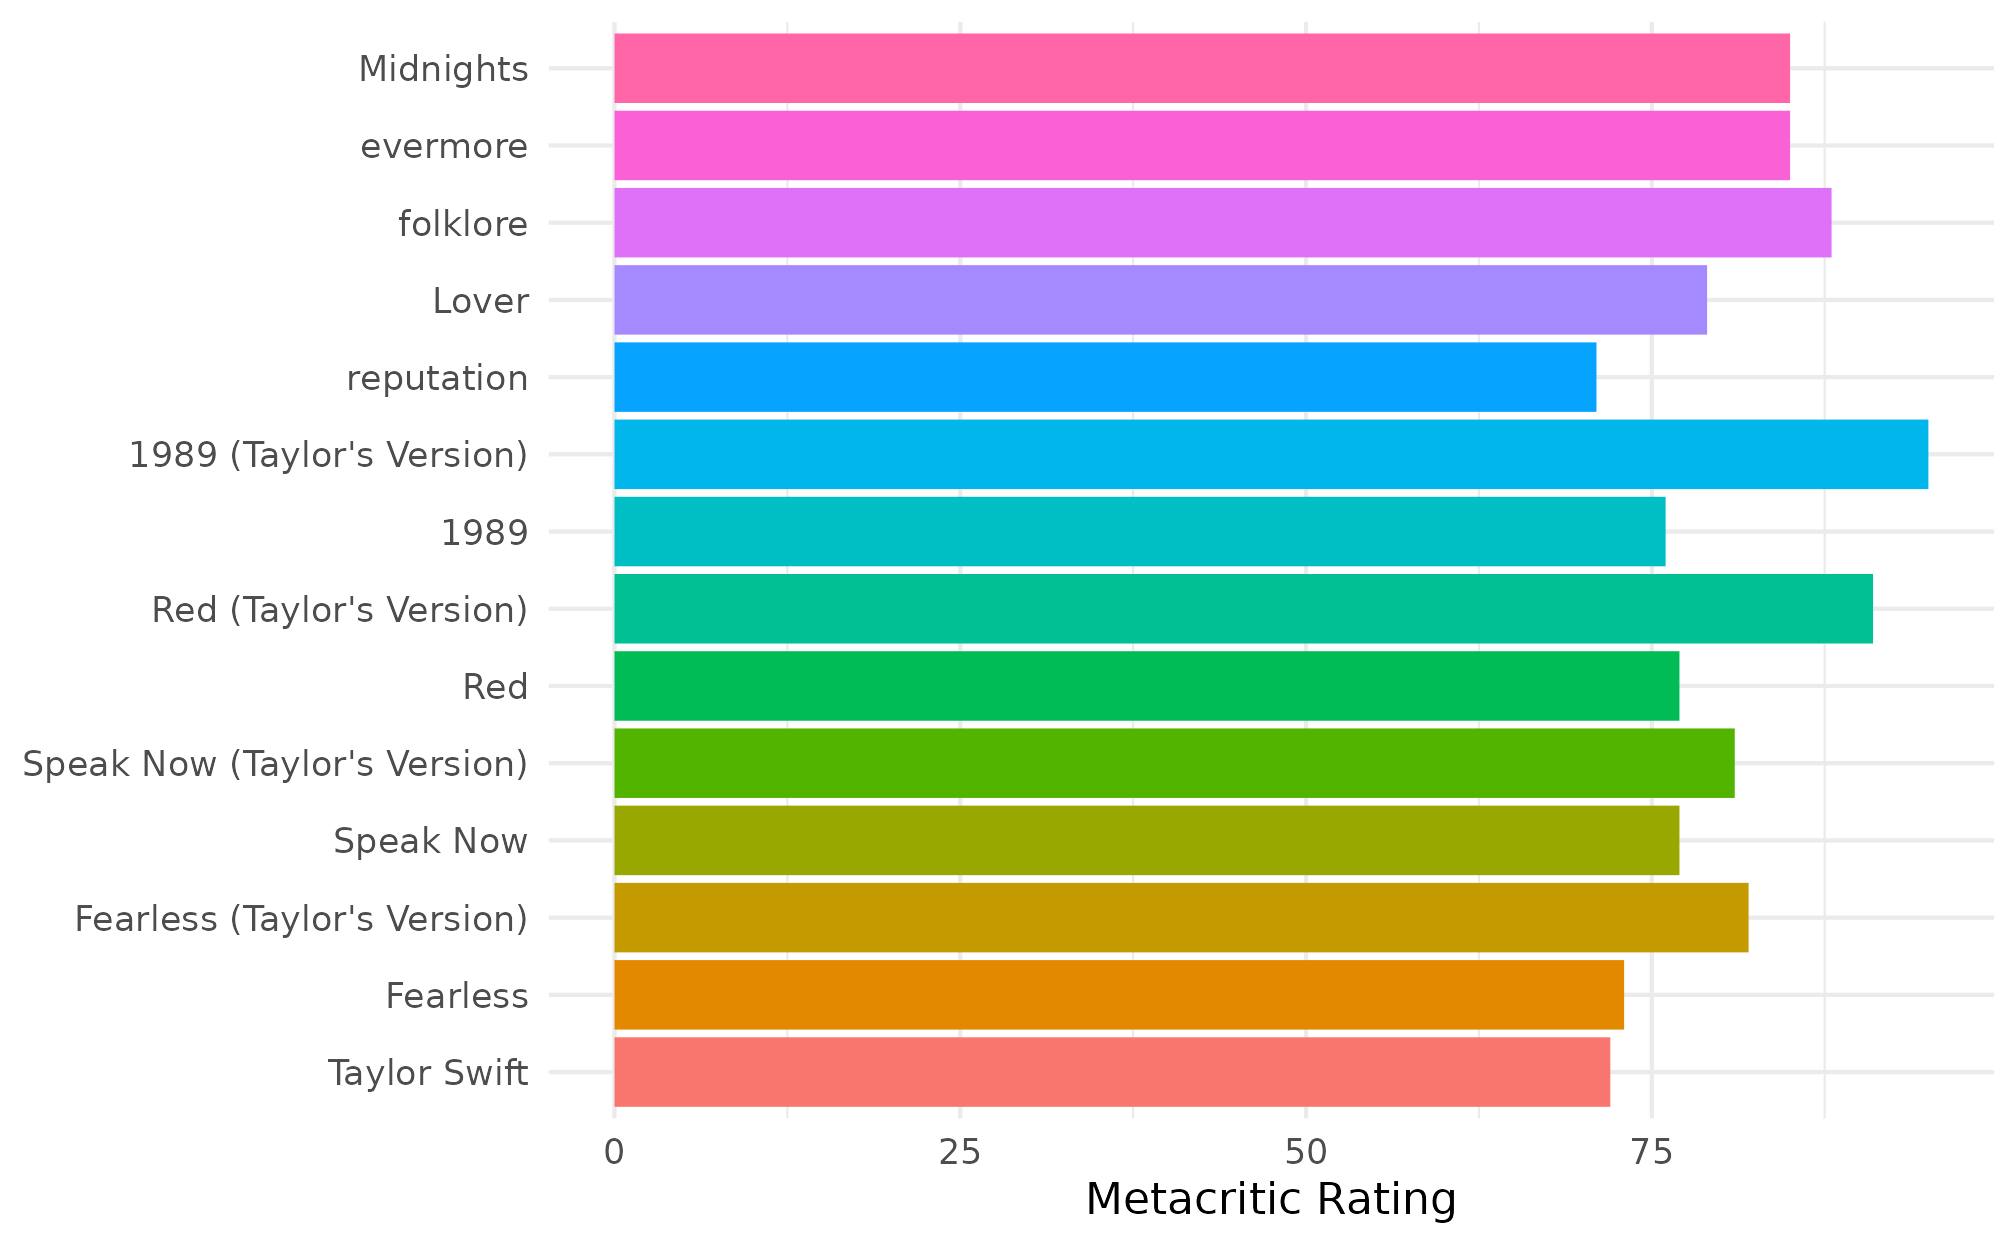 A bar graph with the Metacritic rating on the x-axis and the album name on the y-axis. Color has been assigned to each bar such that each bar is filled with a color. The colors follow the {ggplot2} default, resulting in a rainbow-like palette.